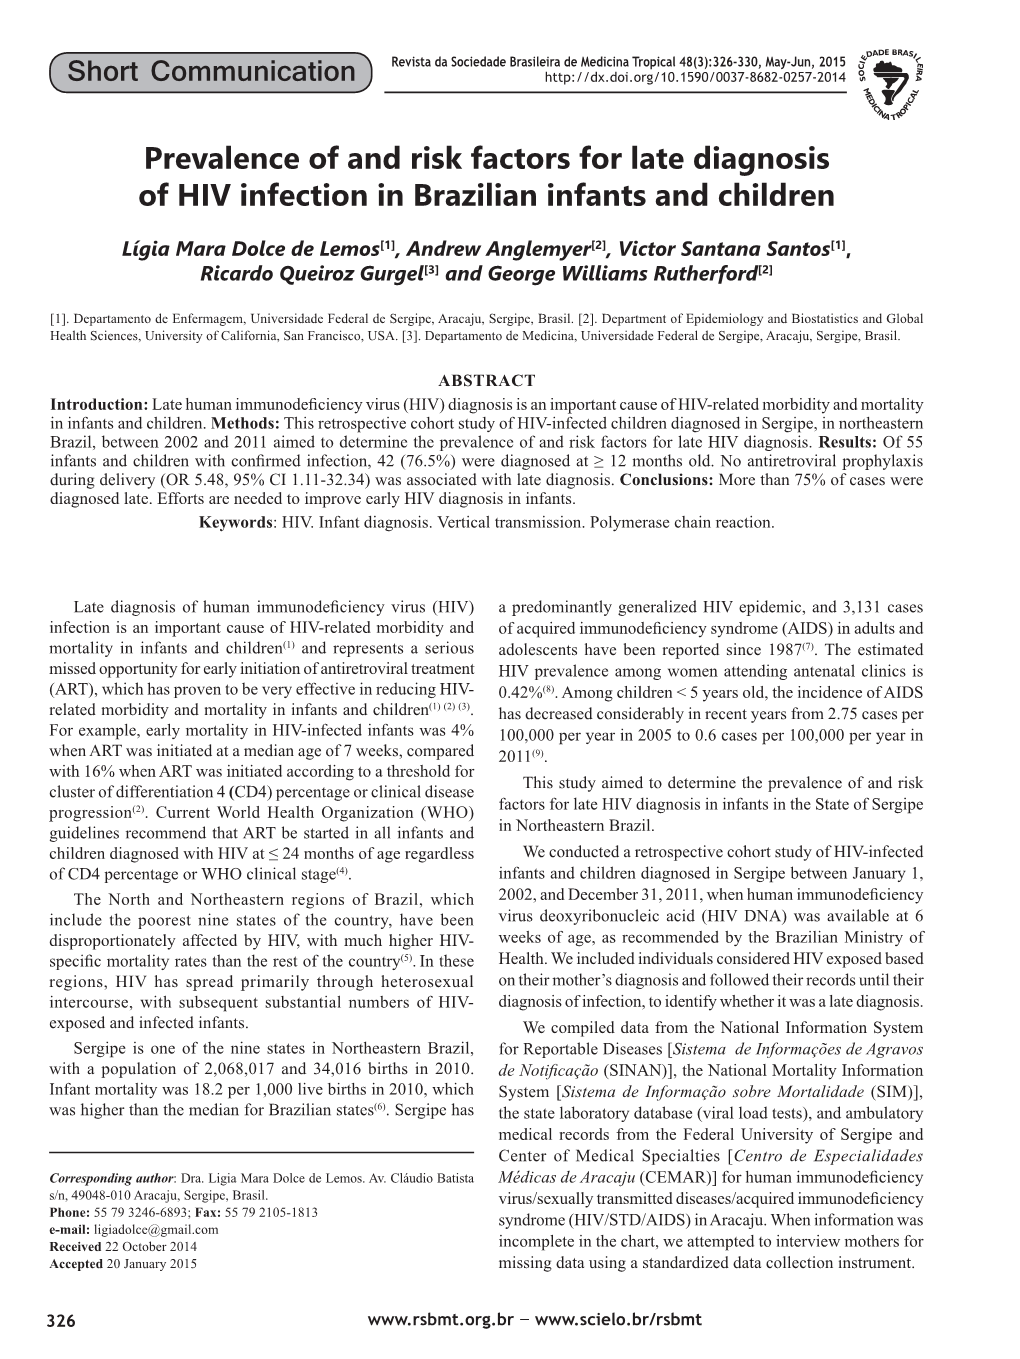 Prevalence of and Risk Factors for Late Diagnosis of HIV Infection in Brazilian Infants and Children